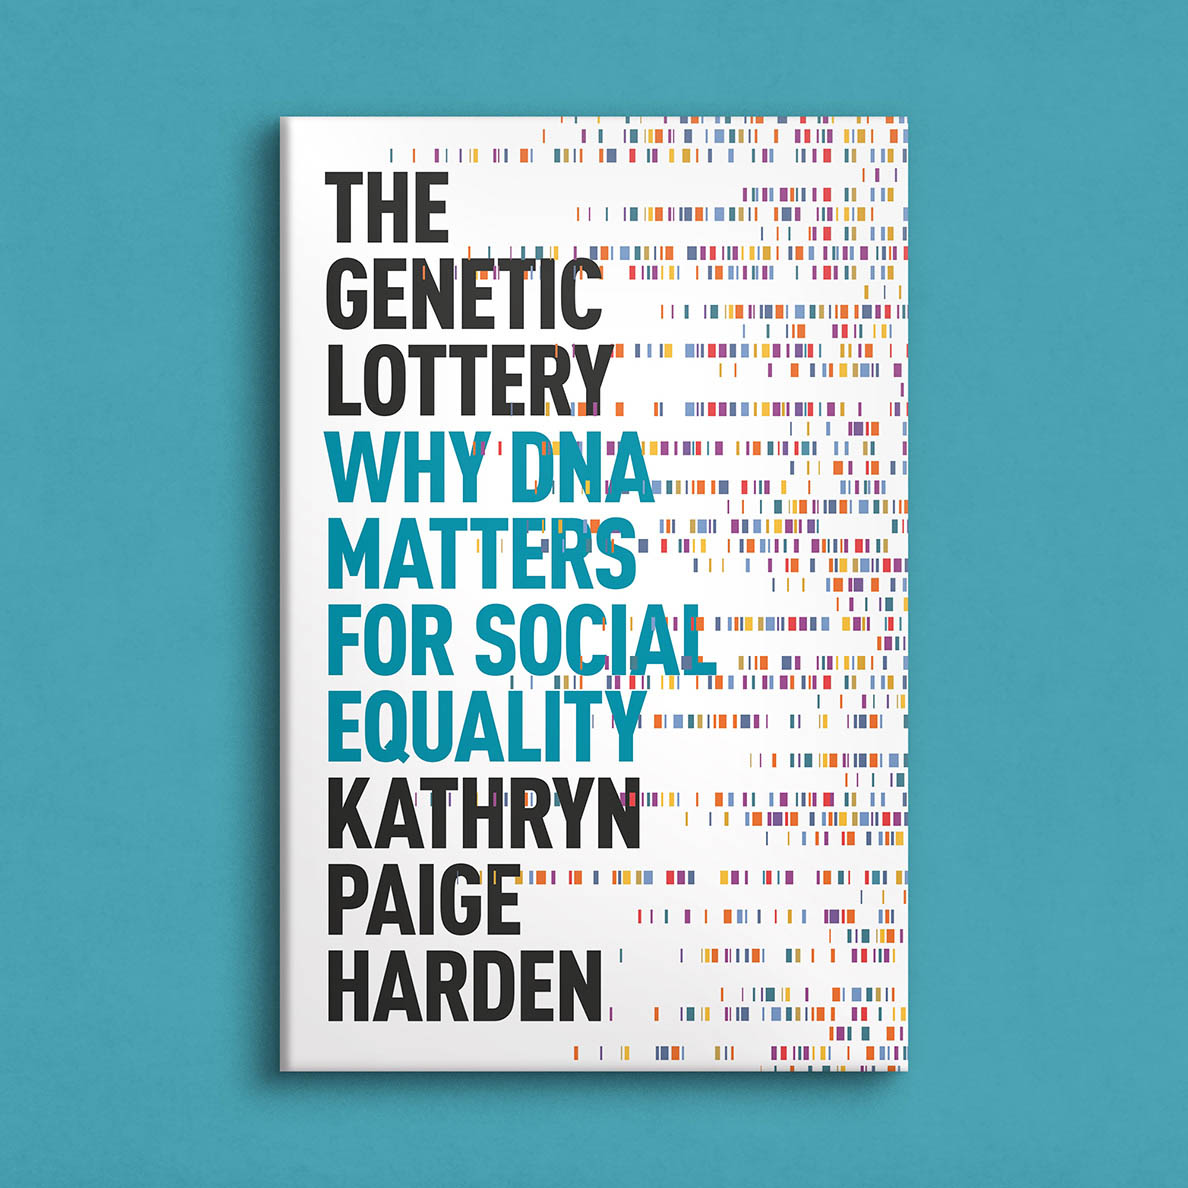 The Genetic Lottery book cover